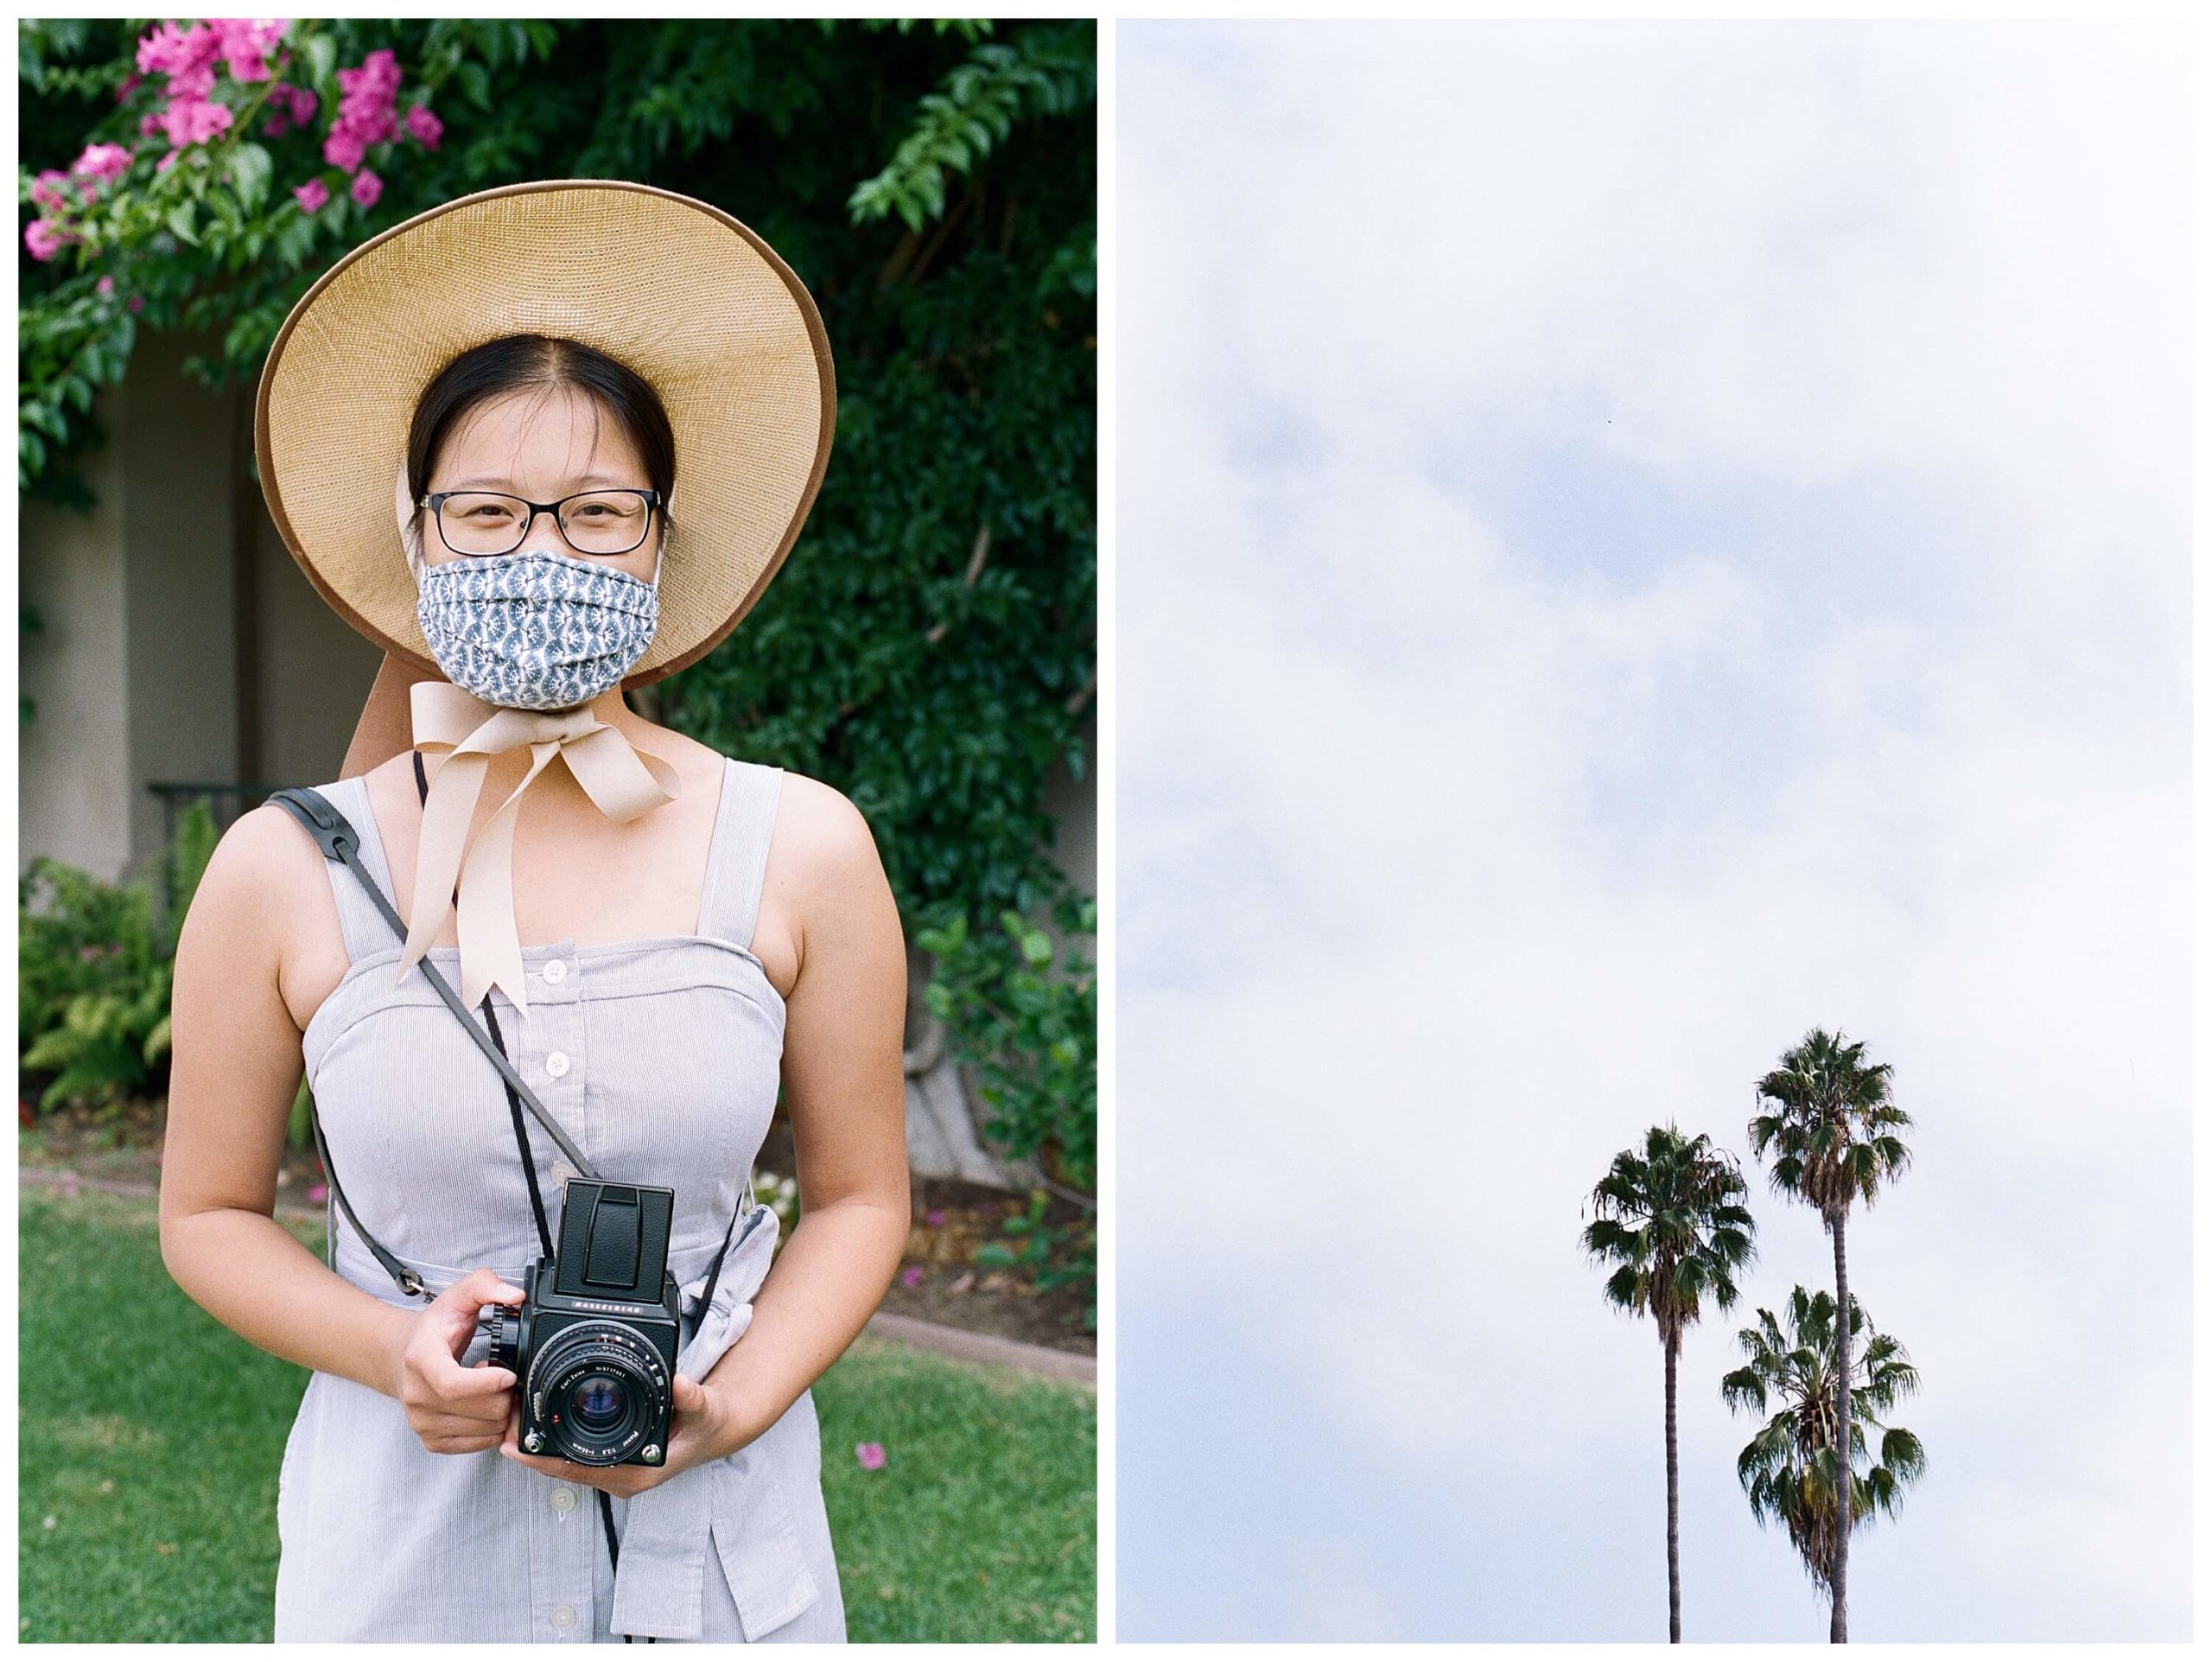 Left: Young woman wearing a wide-brimmed pale straw sunhat and glasses smiles from underneath a blue face mask. She is wearing a light blue sundress and is holding a Hasselblad. Right: Three palm trees rise against the sky in San Diego.